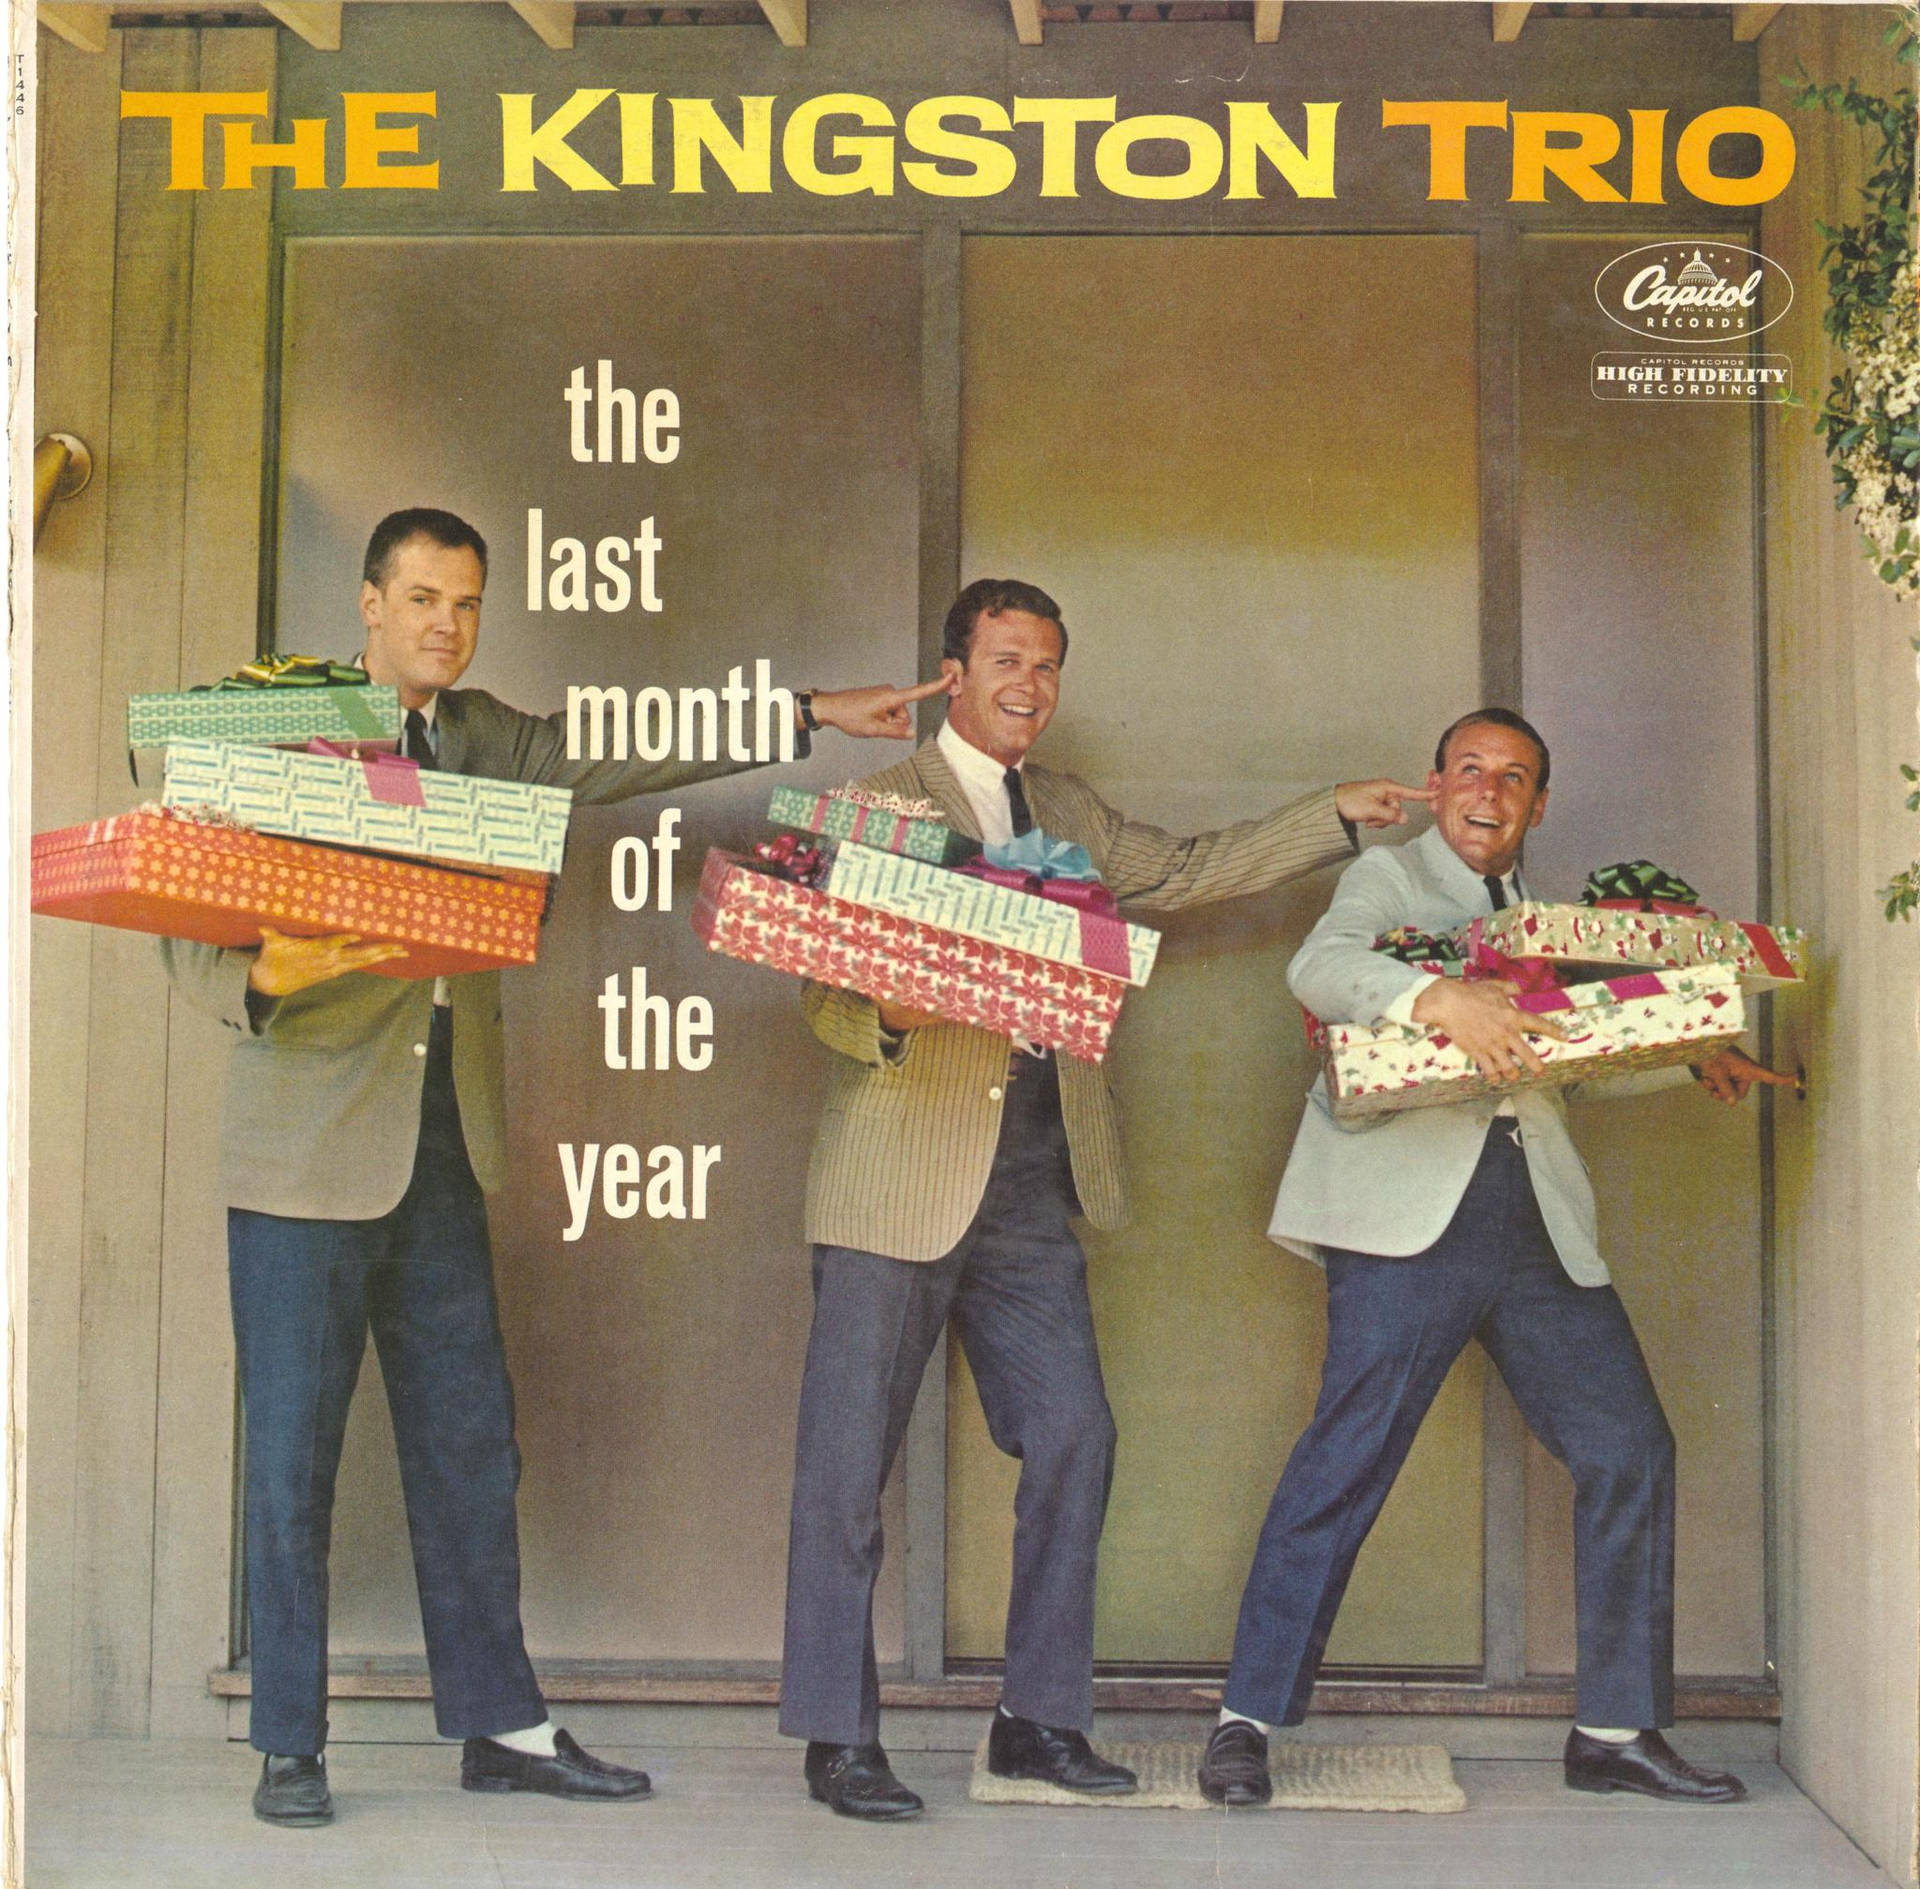 Det Kingston Trio The Last Month Of The Year Album Cover Wallpaper